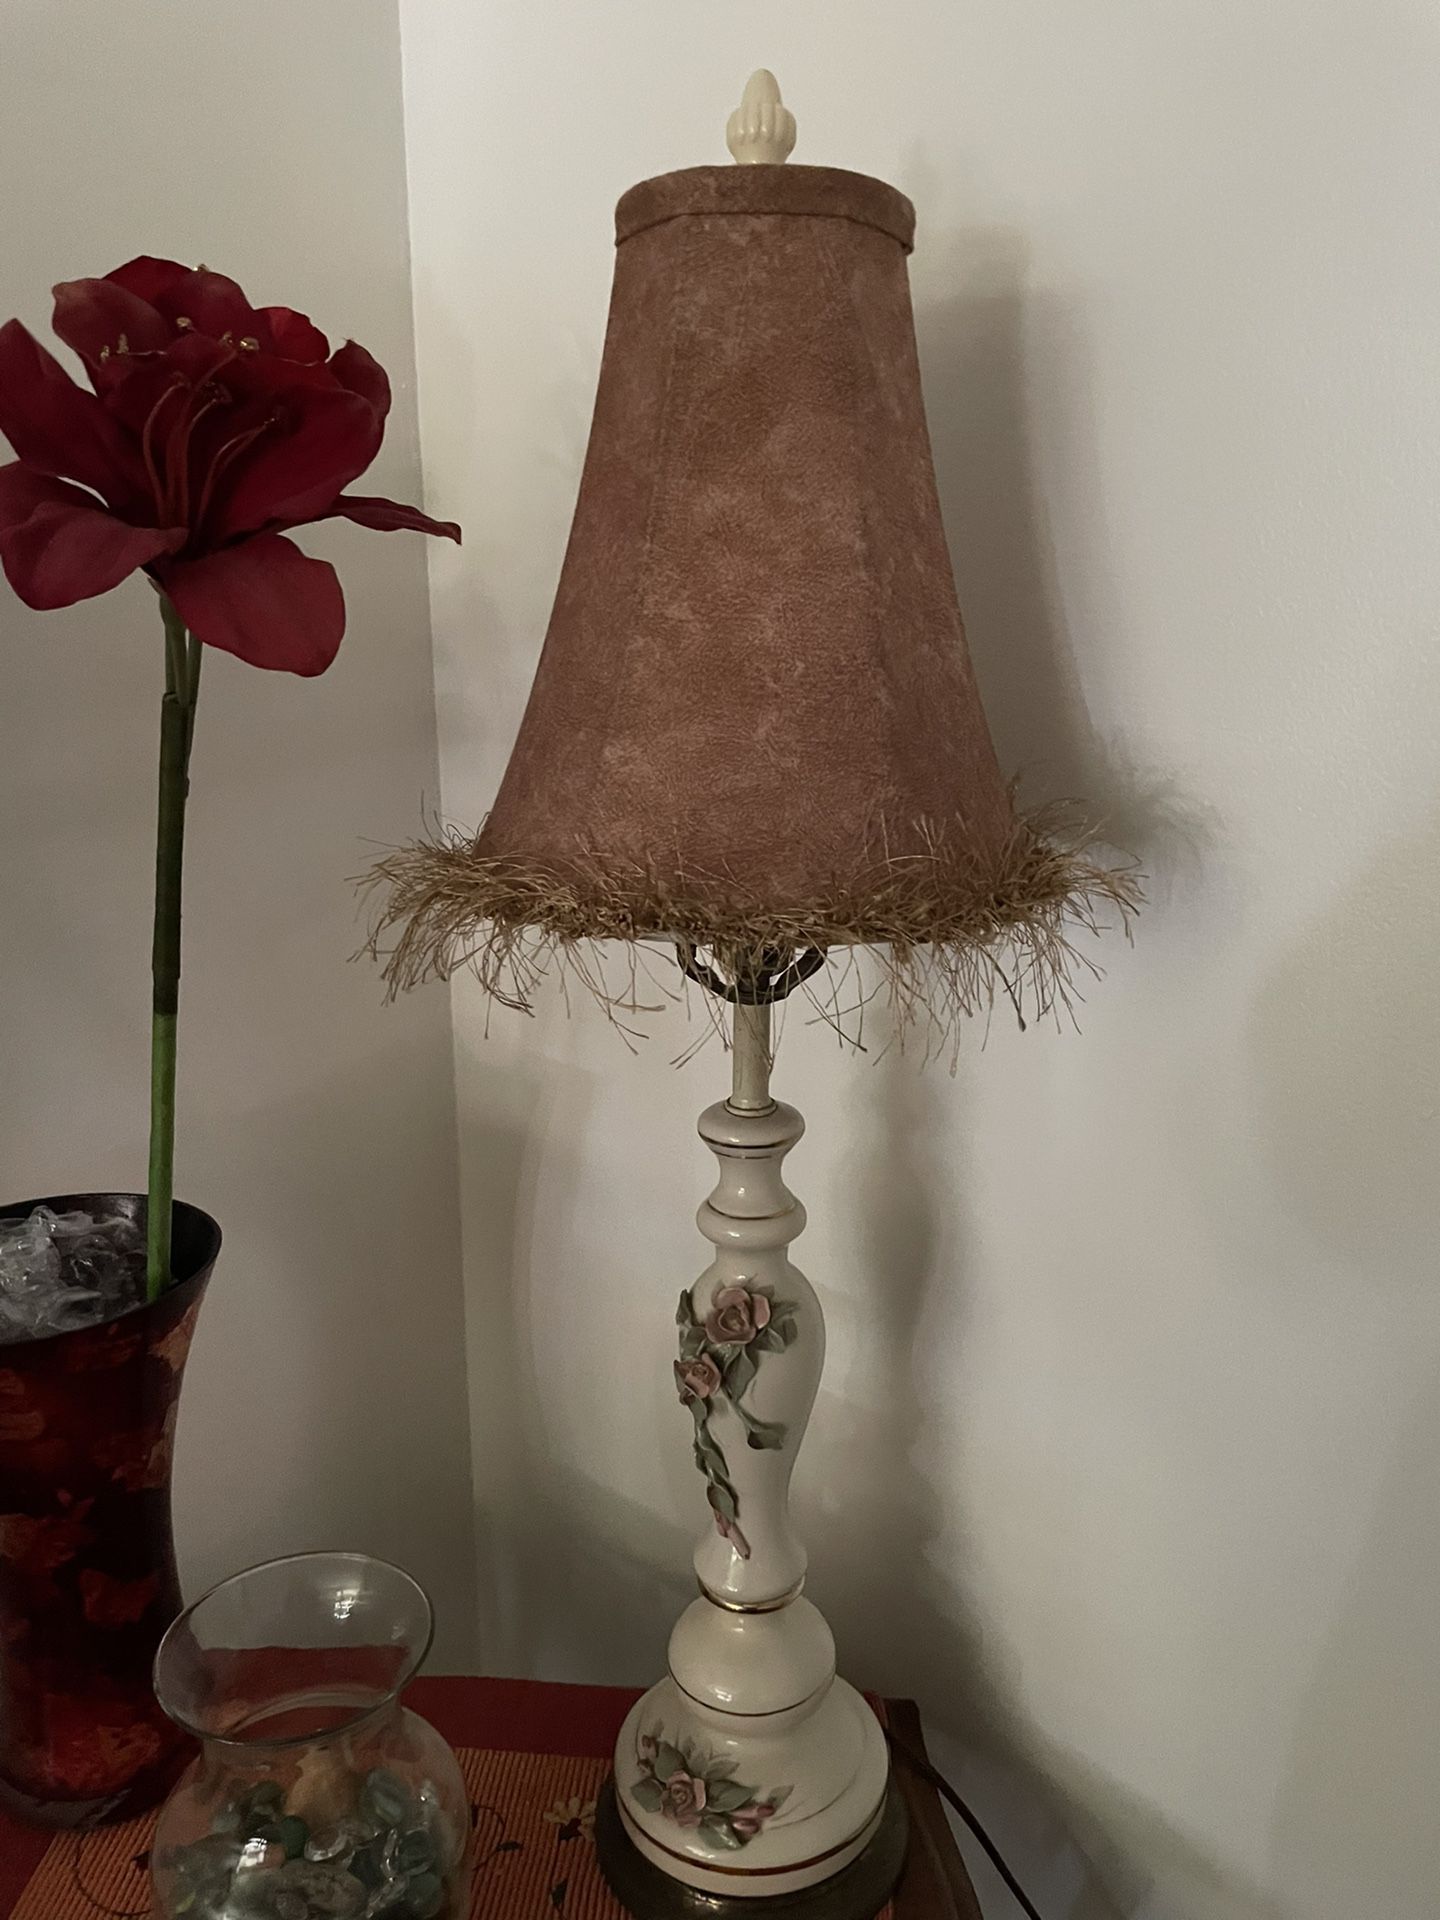 A Pair Of Lamps With Embossed Roses (Vintage)